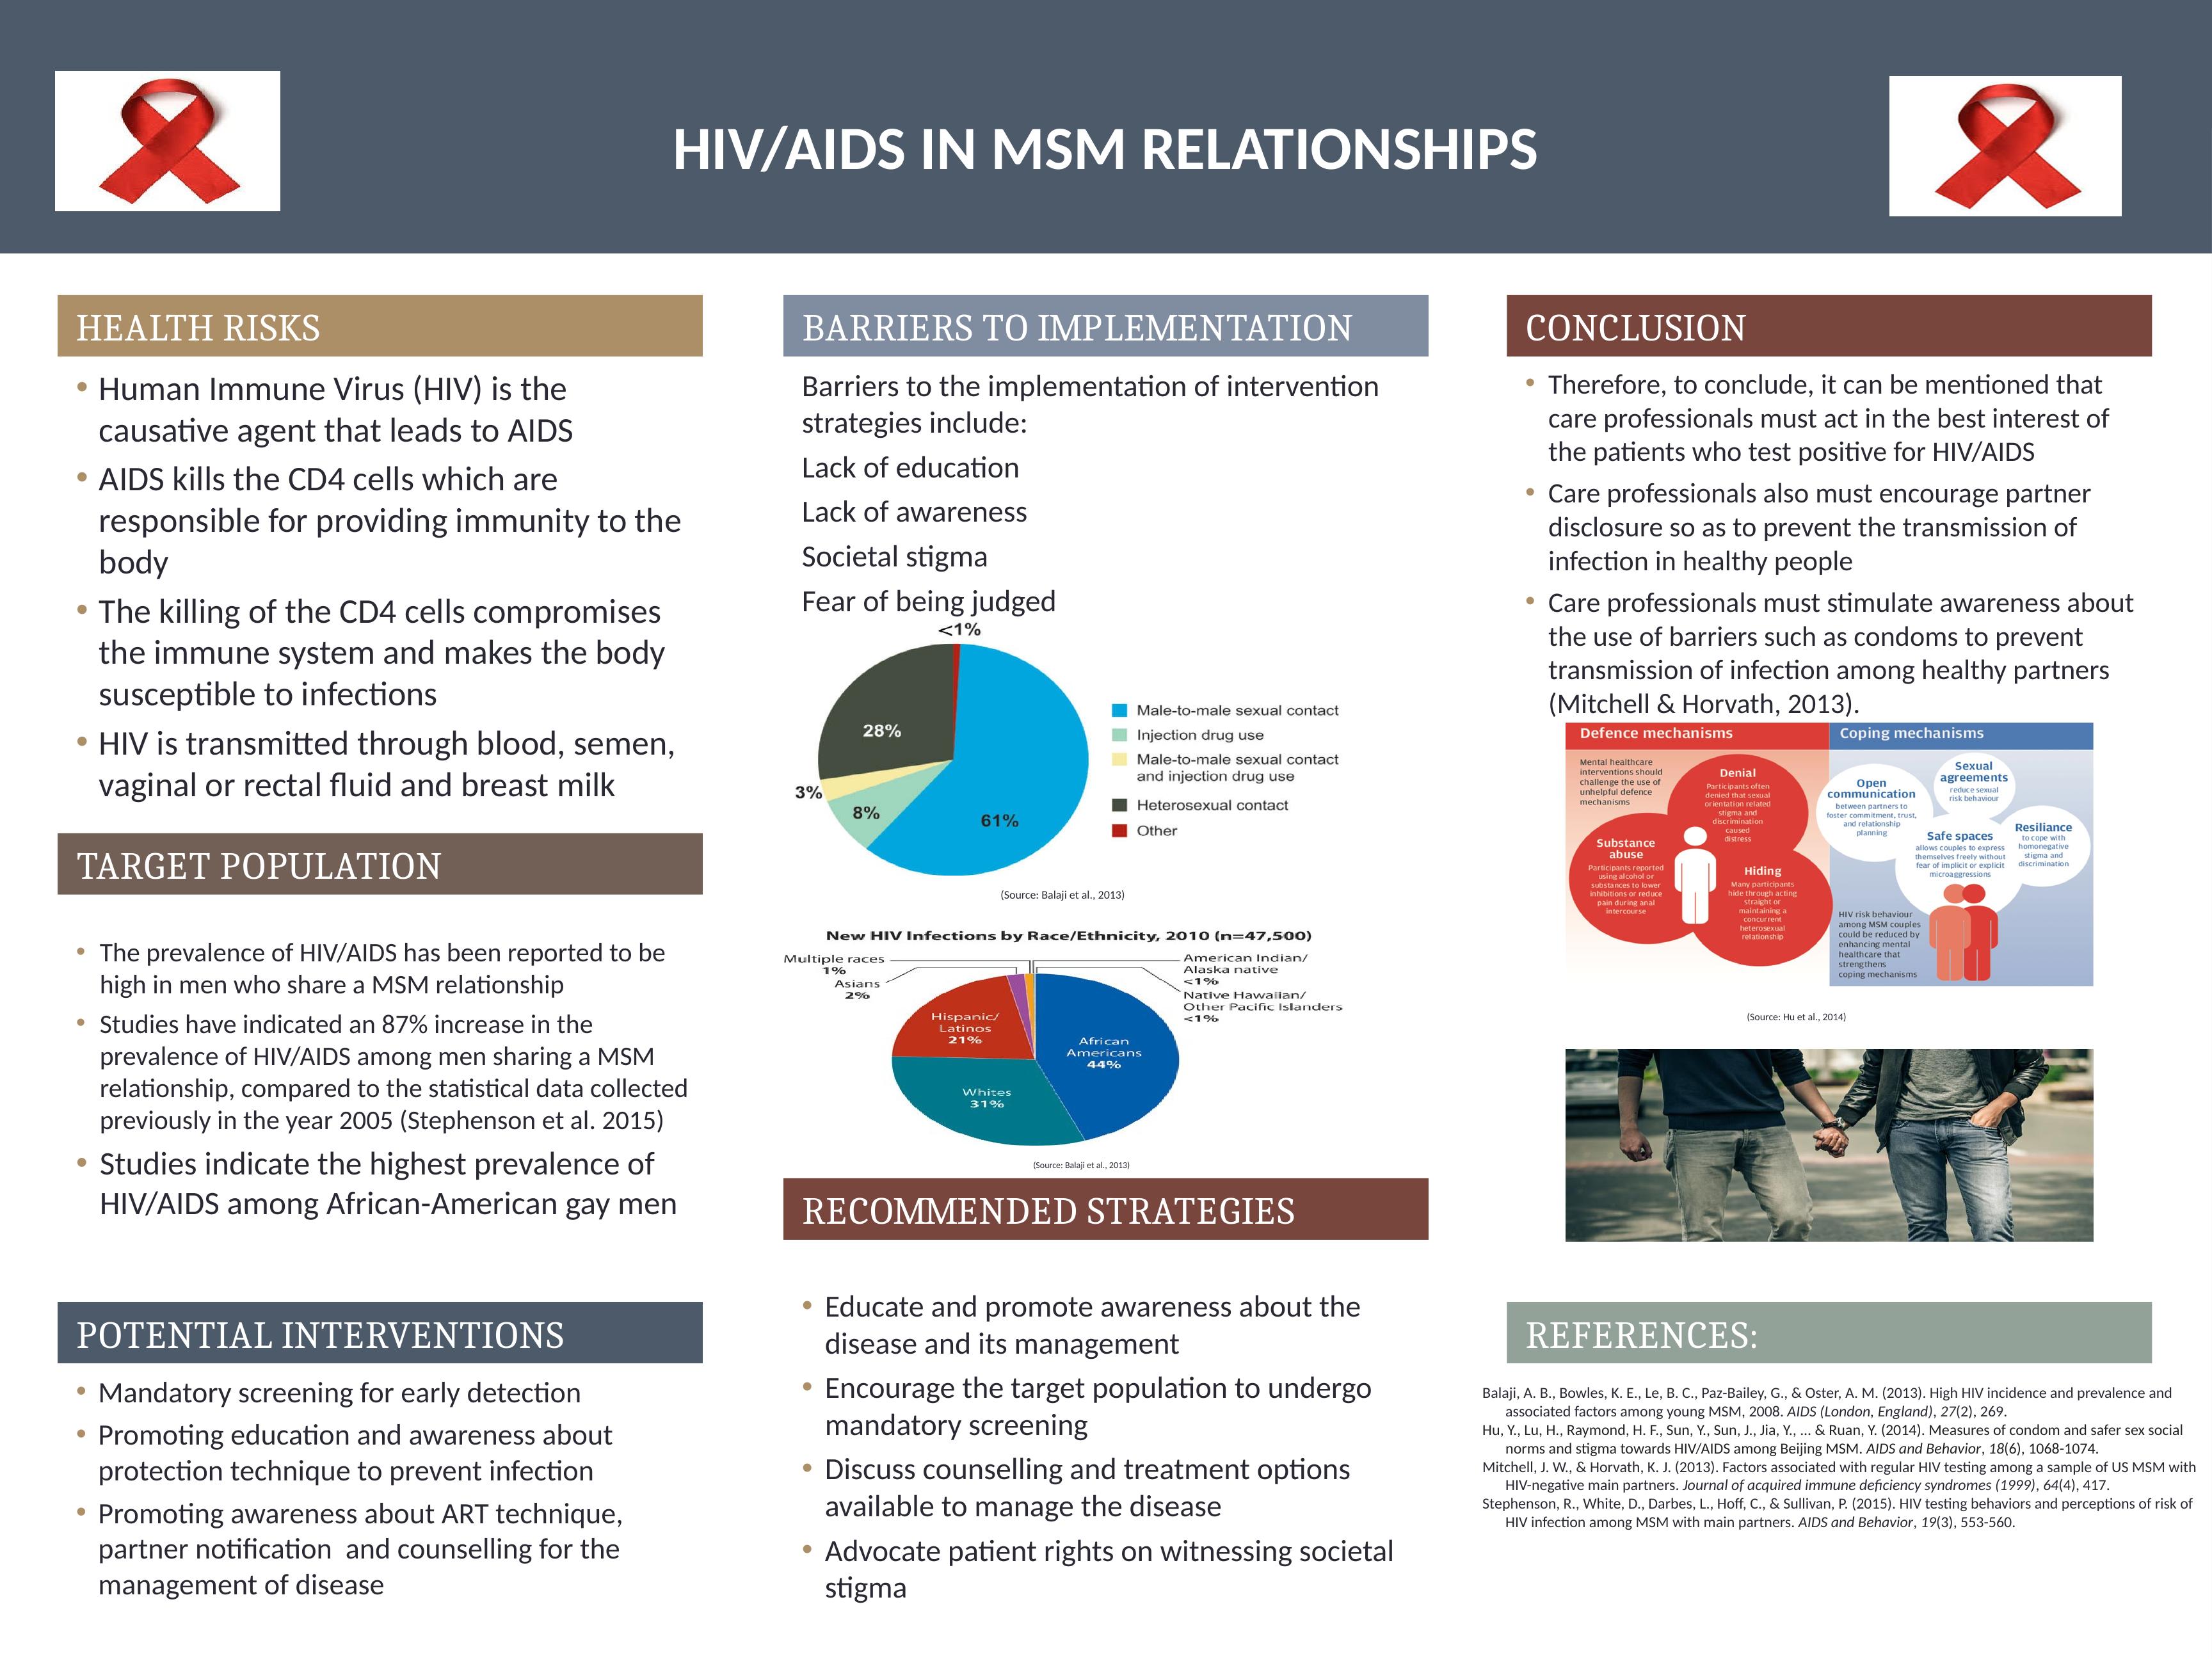 HIV/AIDS in MSM Relationships: Health Risks, Barriers to Implementation, and Recommended Strategies_1